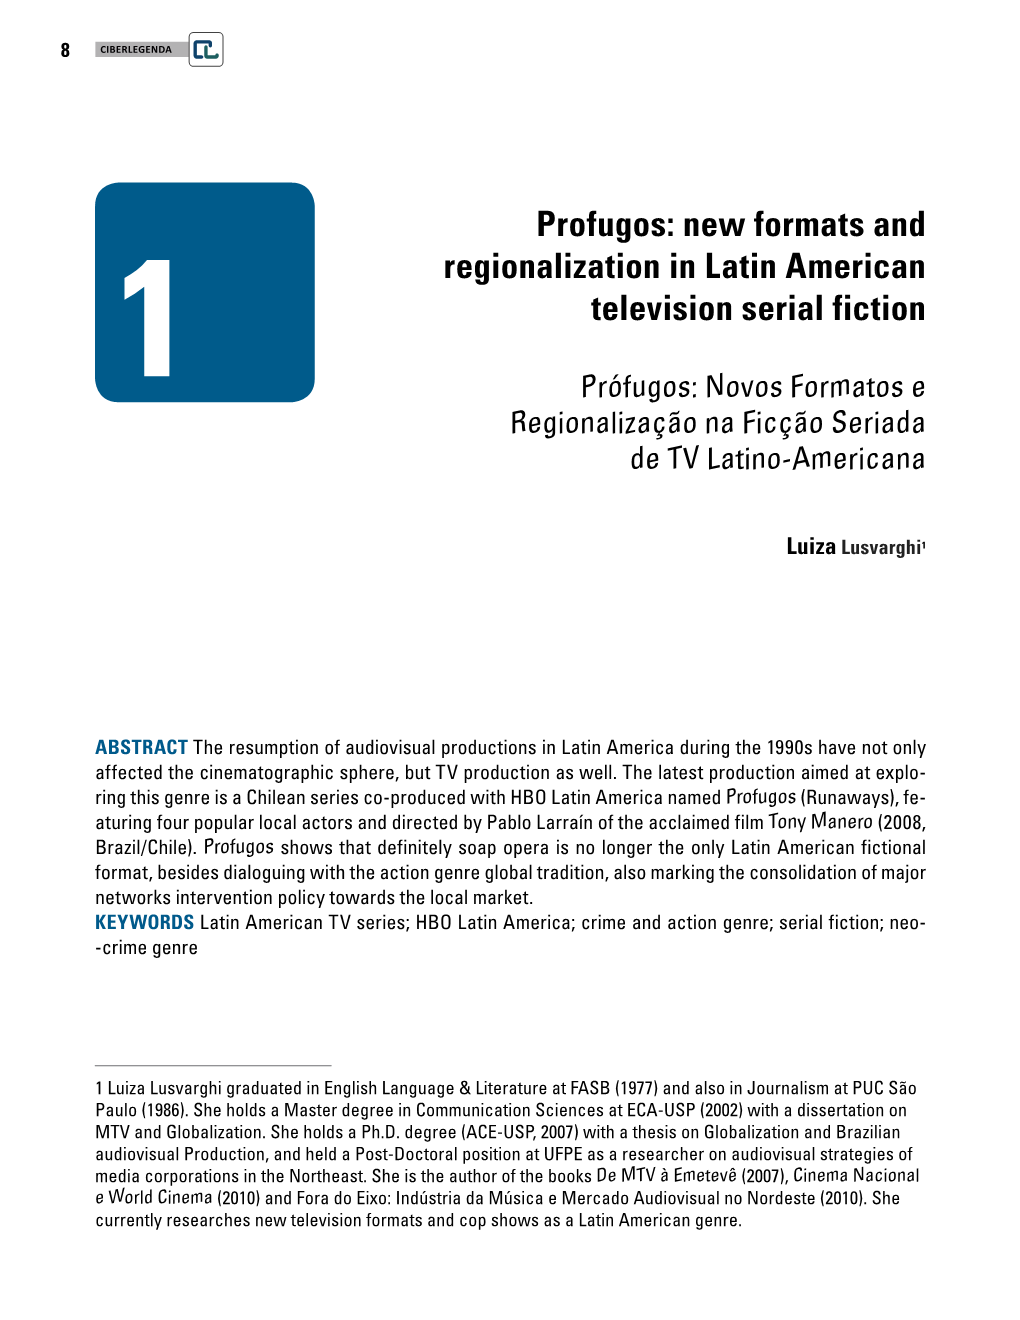 New Formats and Regionalization in Latin American Television Serial Fiction